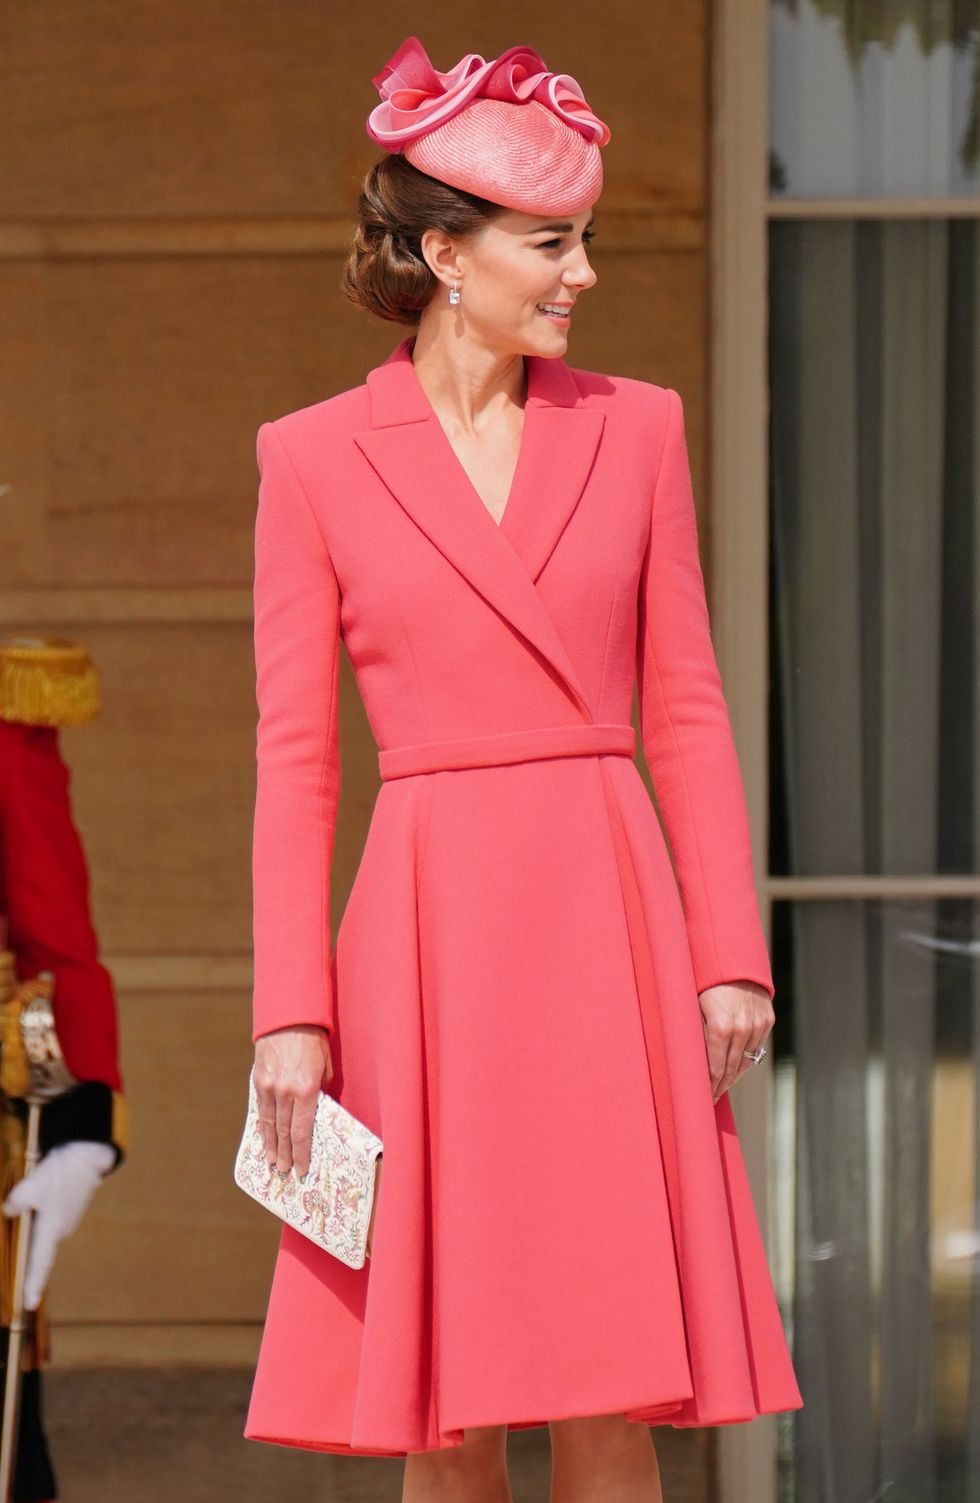 Kate Middleton Wears Coral Coat Dress and Fascinator for Garden Party